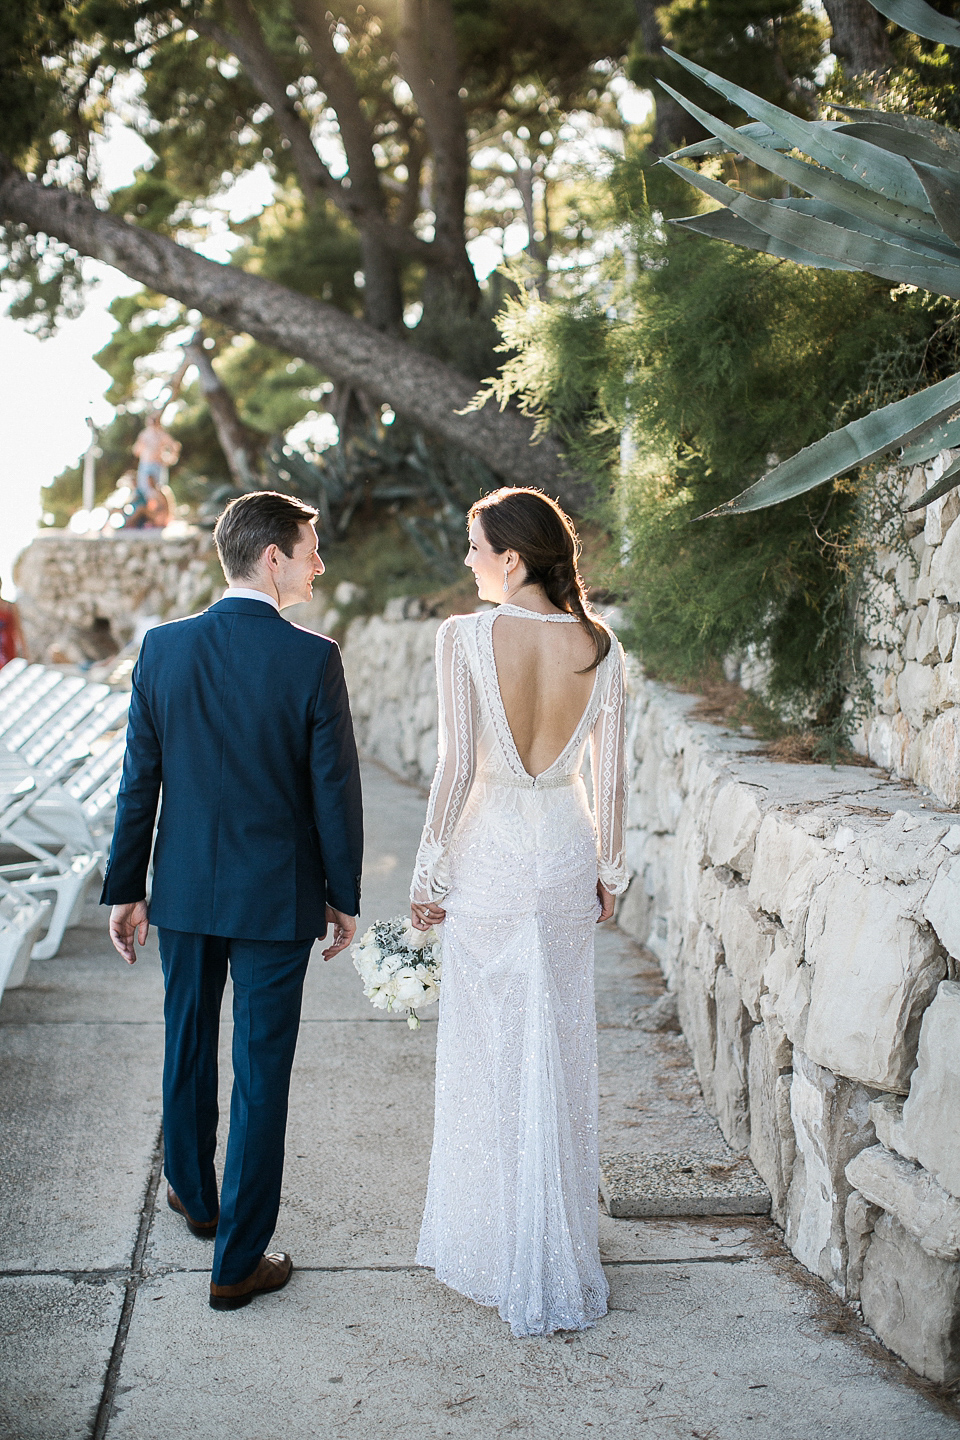 Nataly wore a glamorous Inbal Dror gown for her Midsummer Nights Dream inspired wedding in Croatia. Photography by LIfe Stories Wedding.